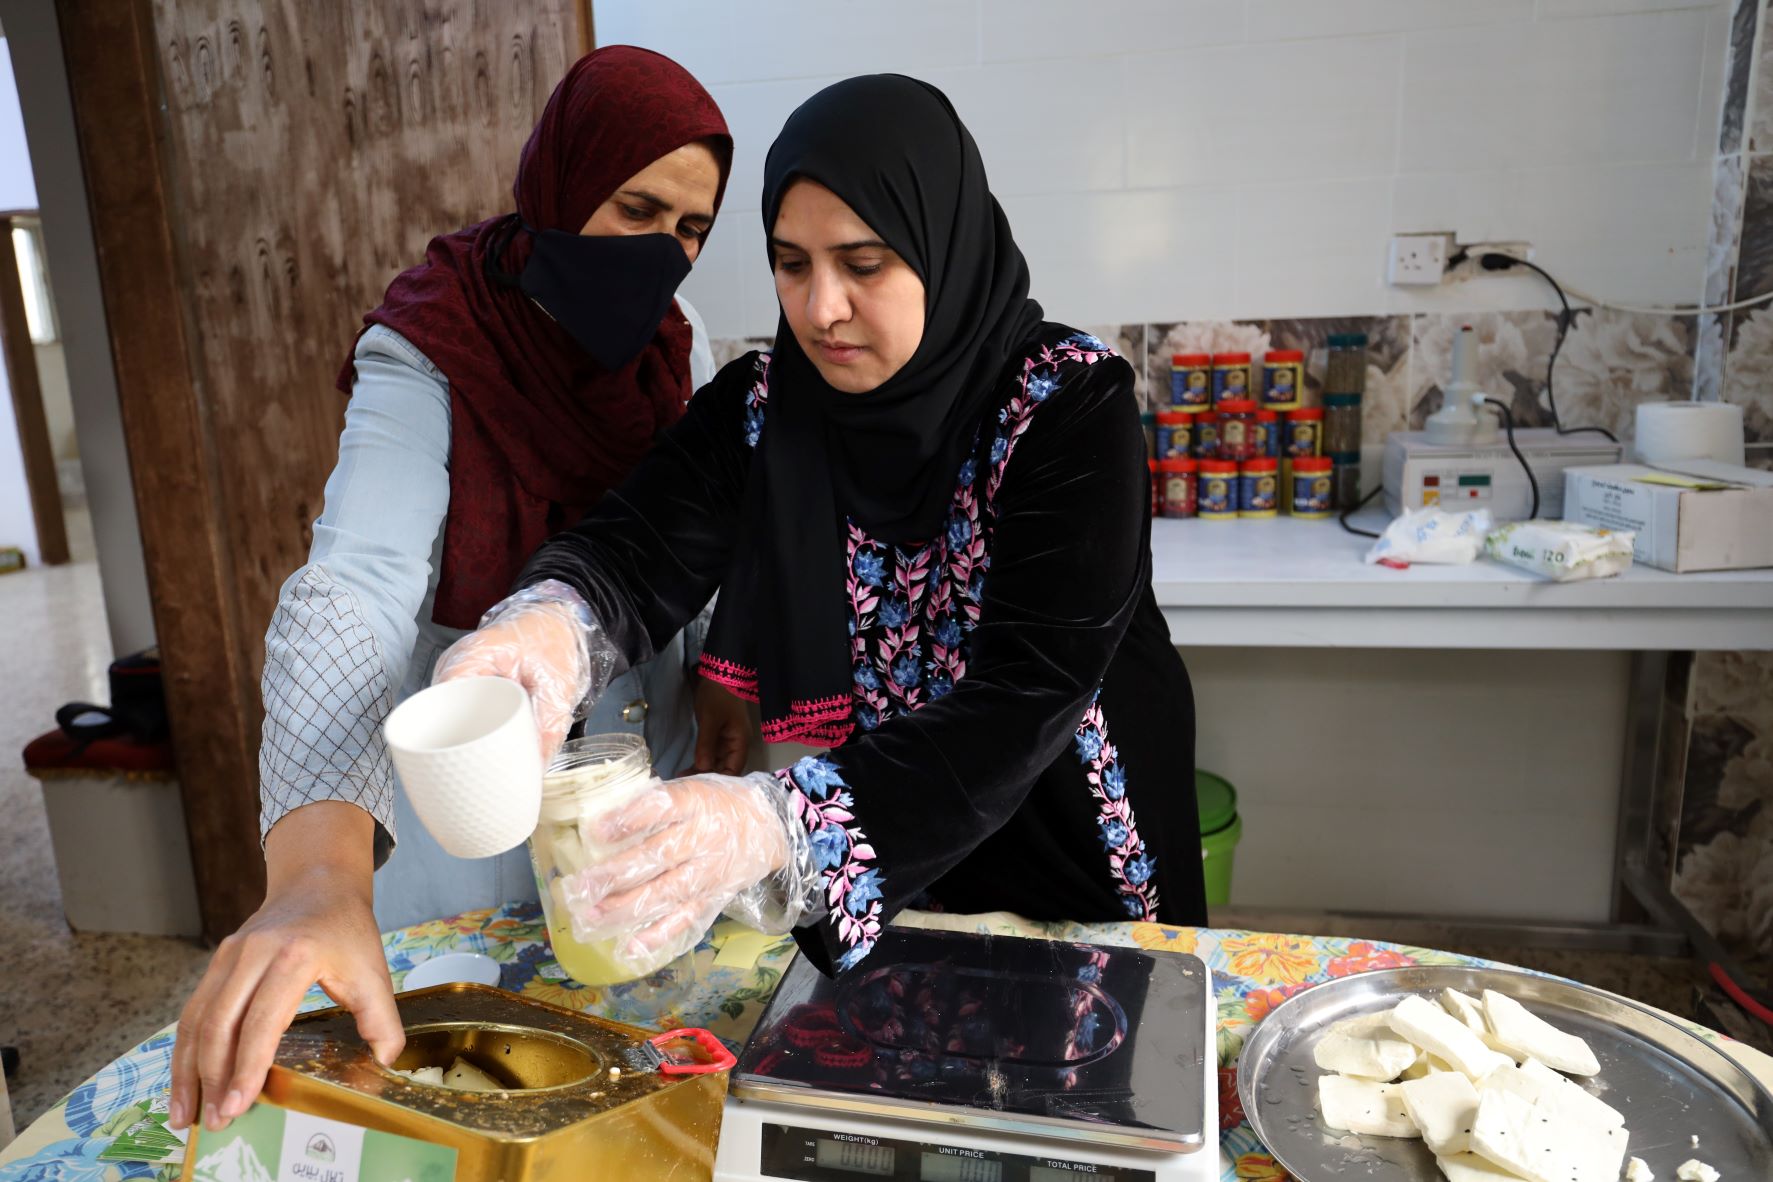 Agricultural Home-Based Businesses in Jordan Thrive after Support and Training